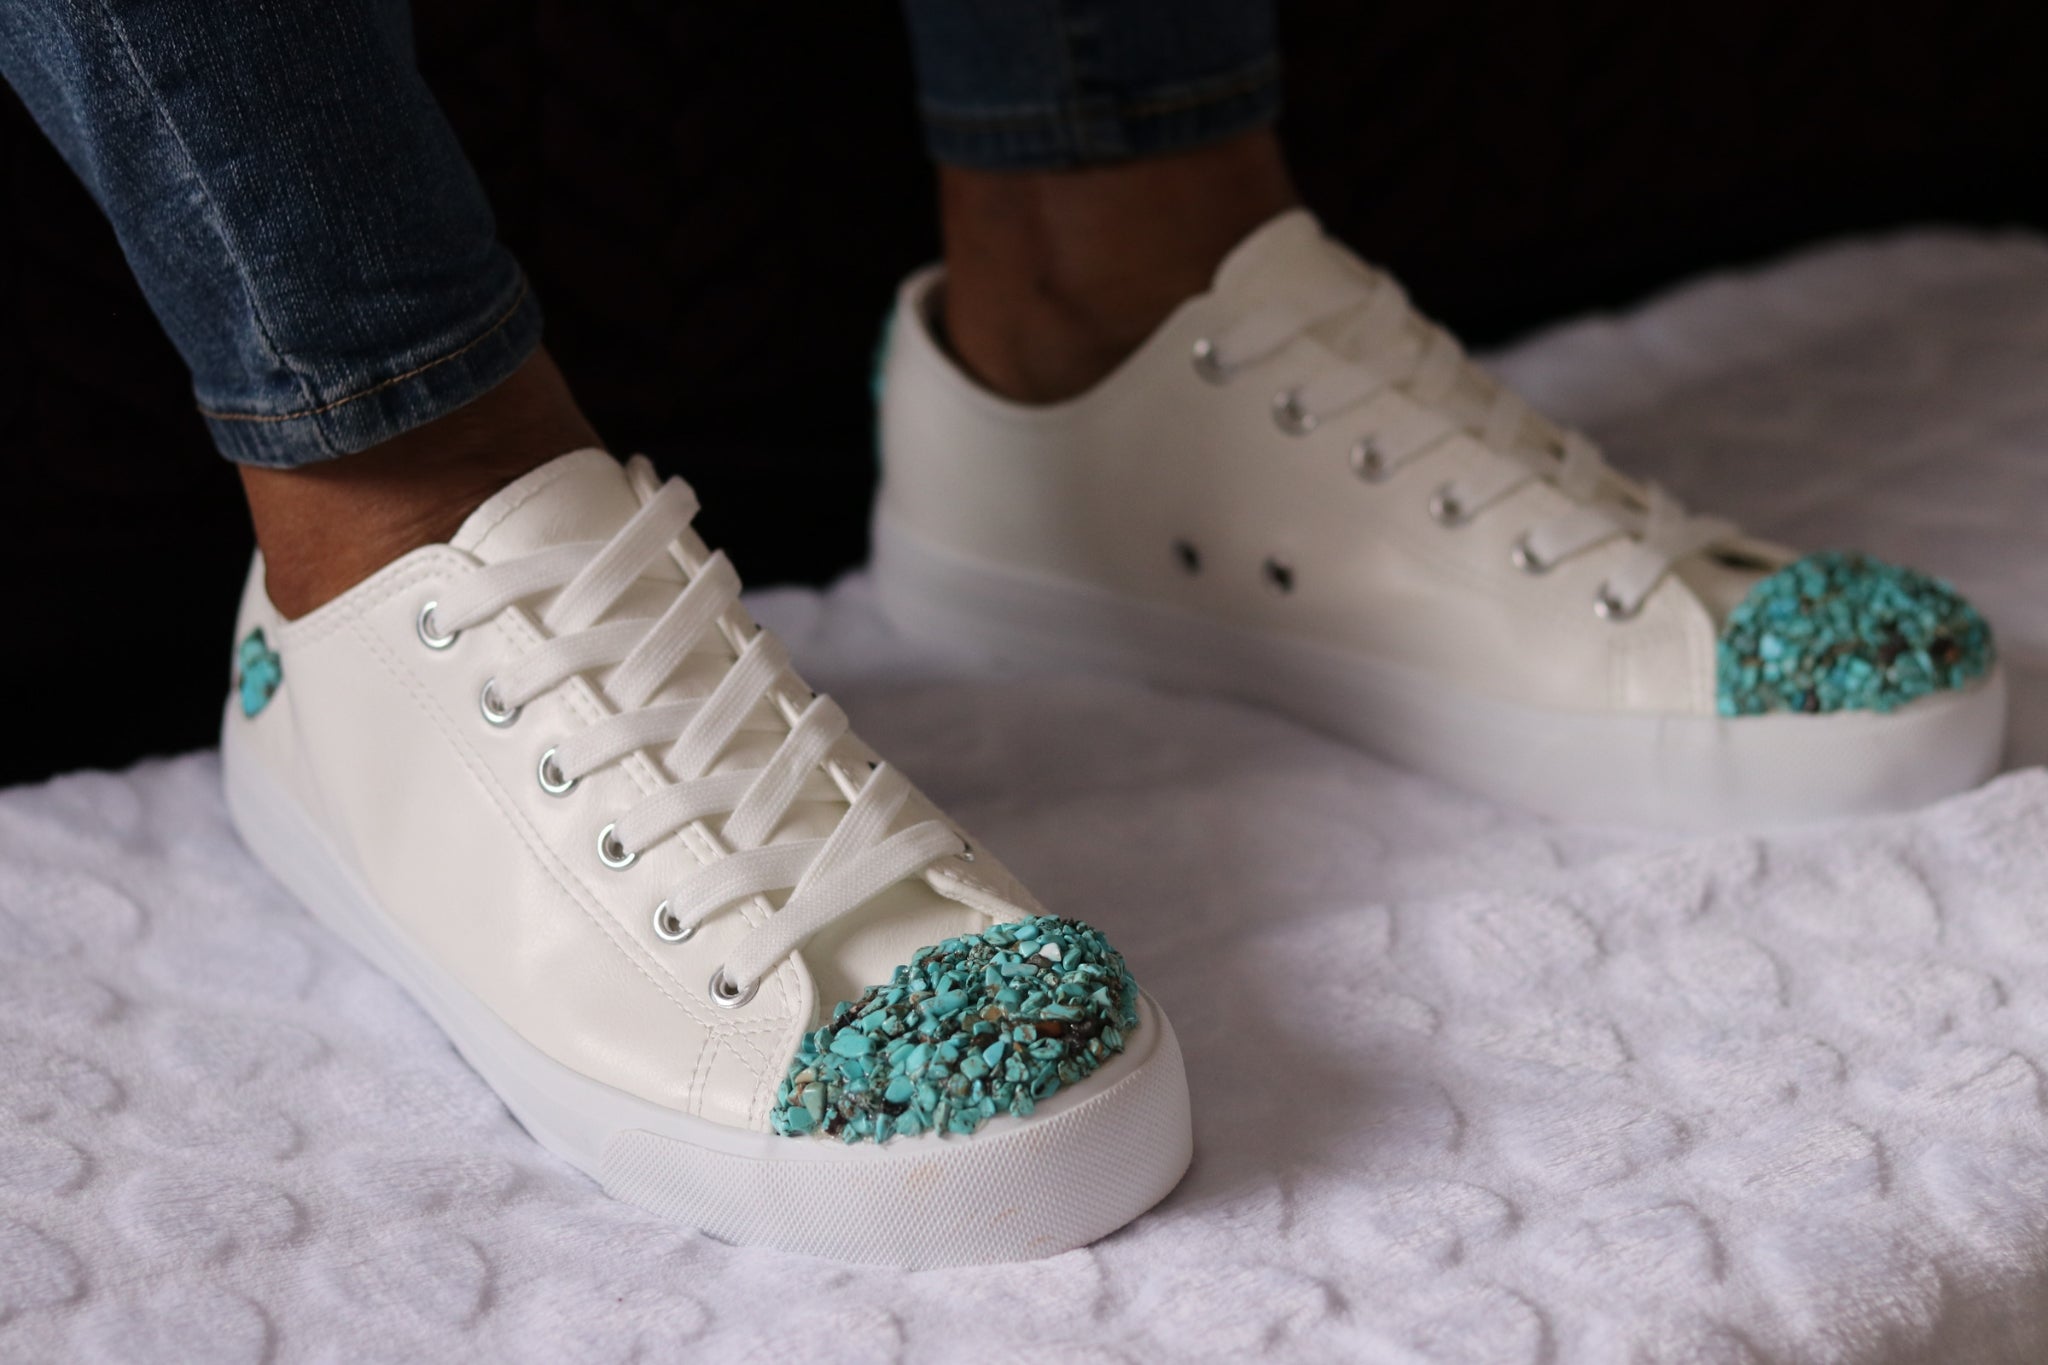 Turquoise Sneakers